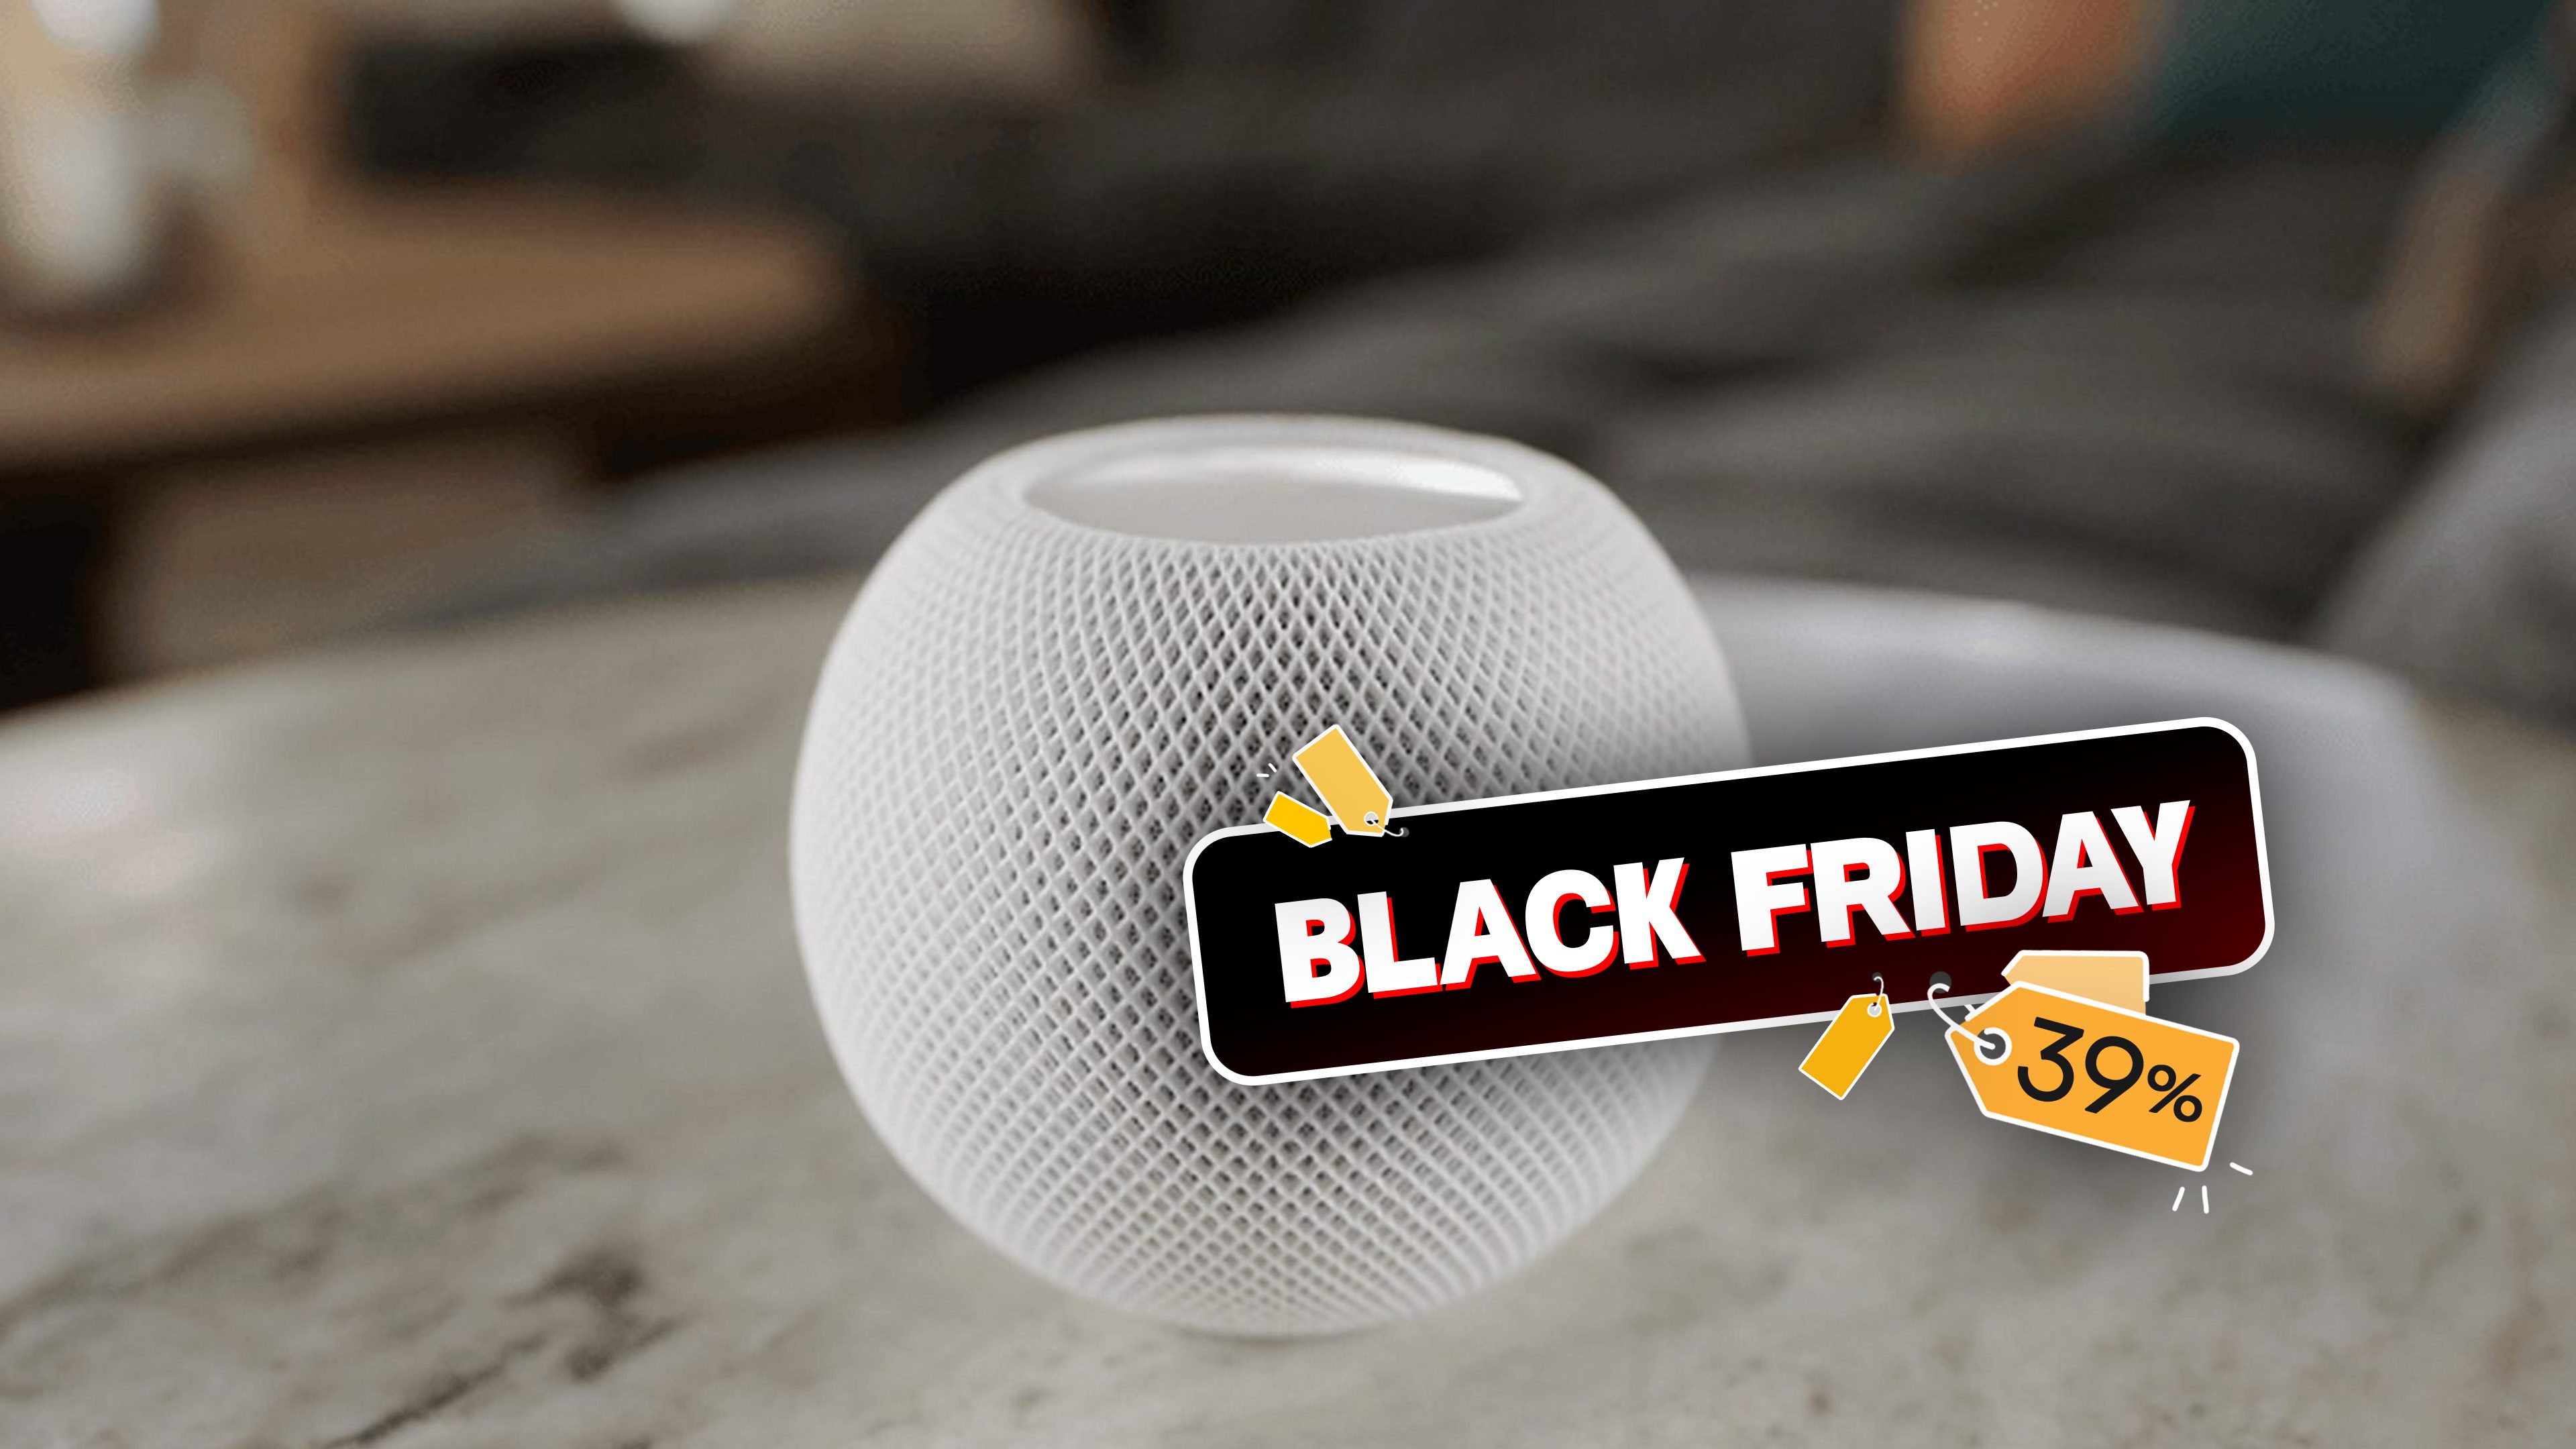 Apple HomePod mini is 39% cheaper on eBay Refurbished today | nextpit